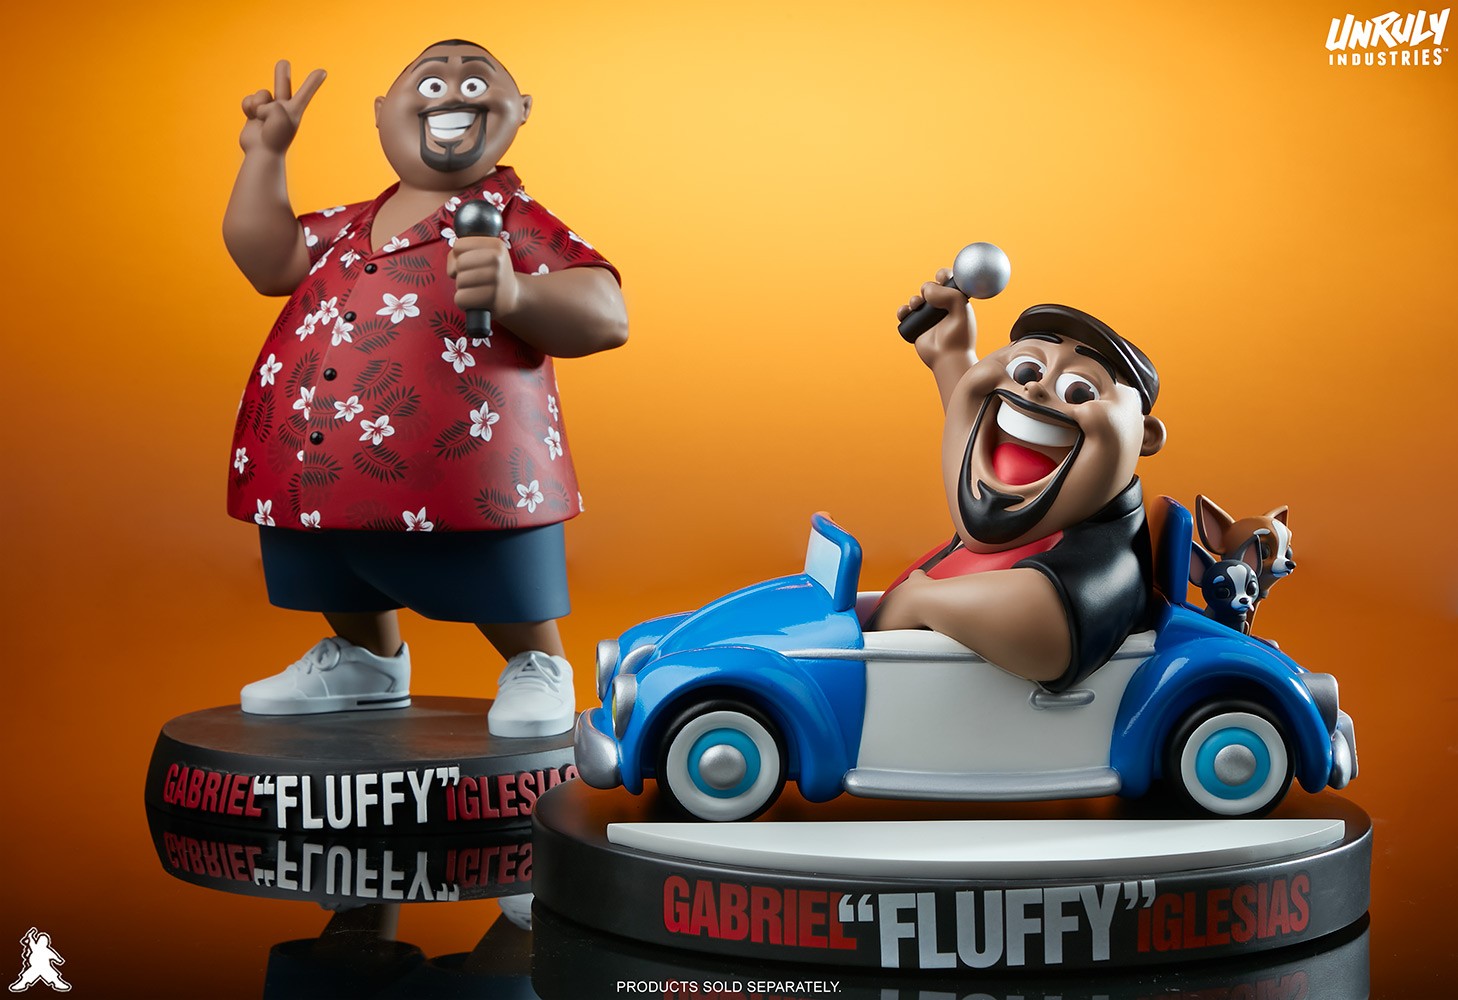 Fluffy: The Fat and The Furious (Prototype Shown) View 19